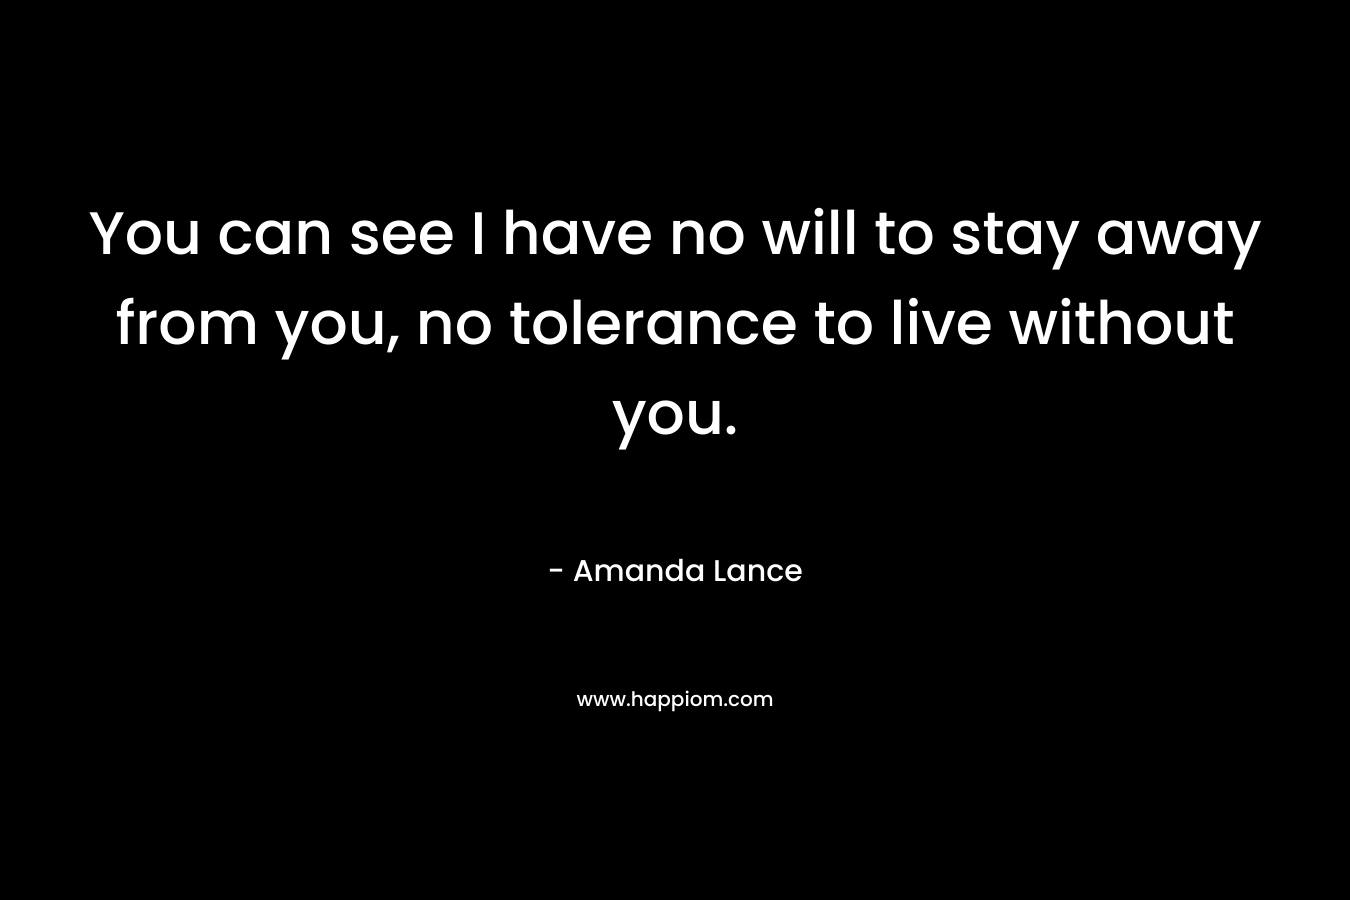 You can see I have no will to stay away from you, no tolerance to live without you.